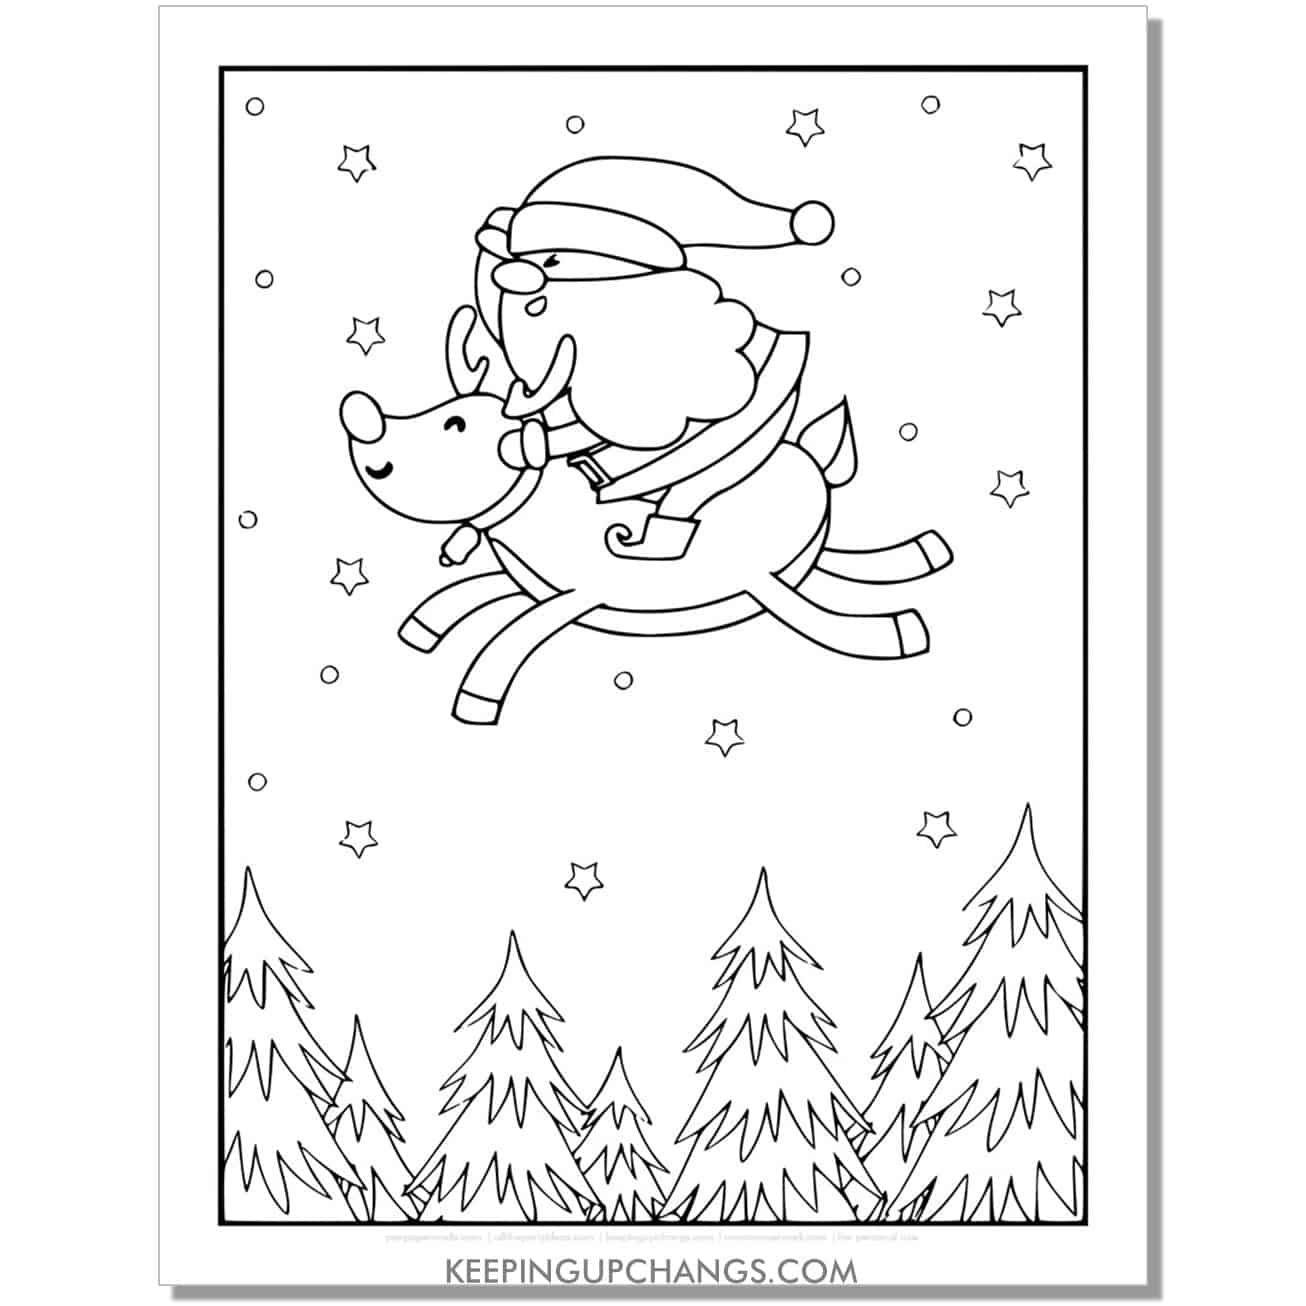 free full size Santa riding on Rudolph reindeer in sky coloring page.